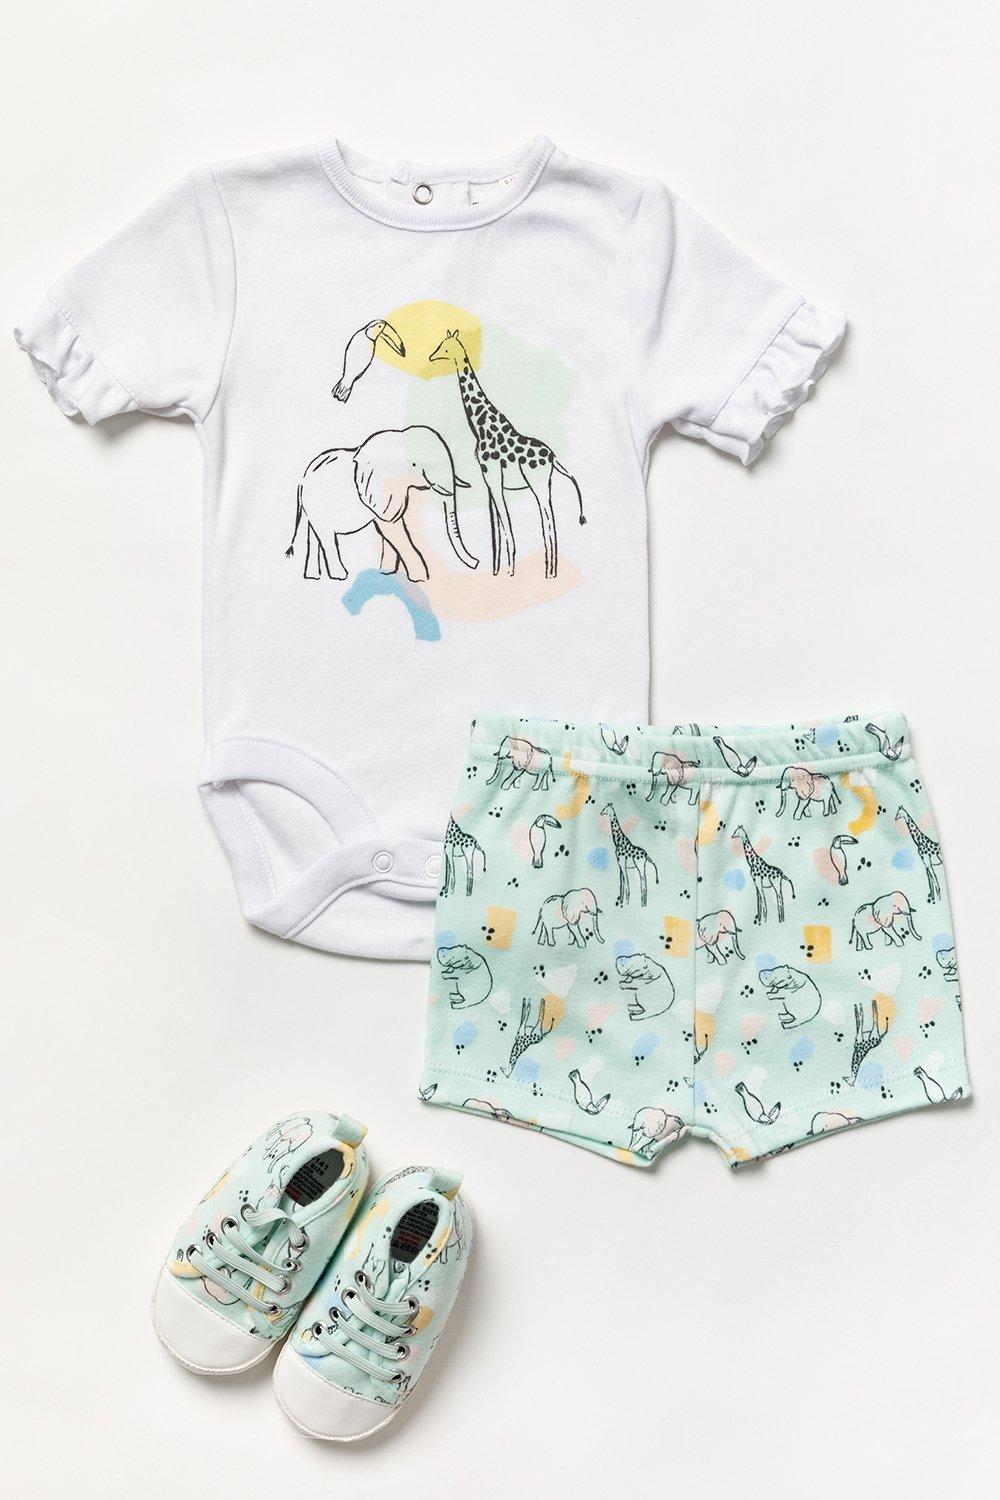 Bodysuit Short and Shoe Outfit Set